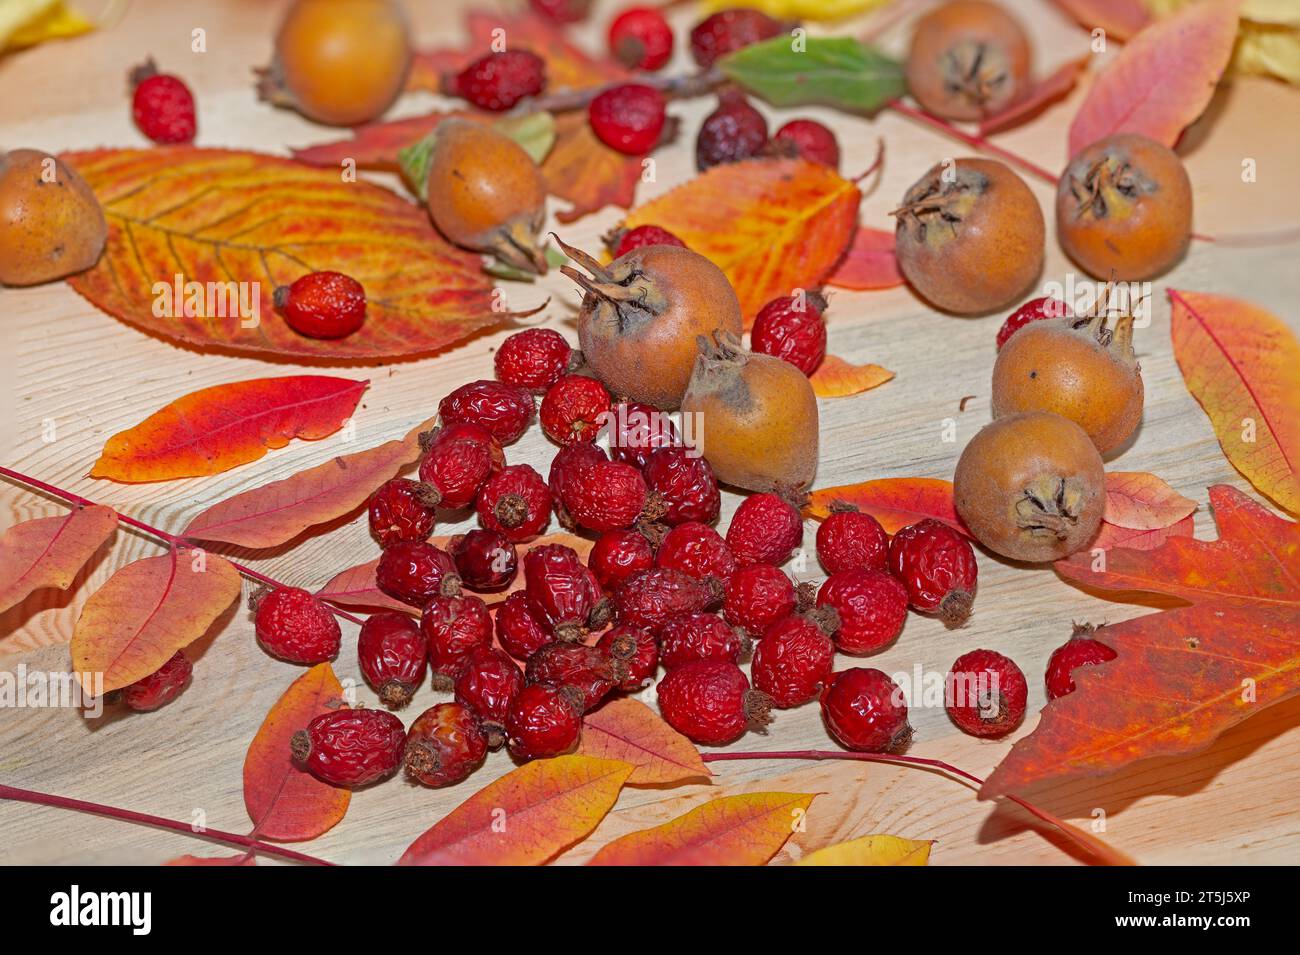 Fresh ripe organic medlar fruit and rose hips on wood and among autumn leaves. Healthy food Mespilus germanica and rose hips. Stock Photo